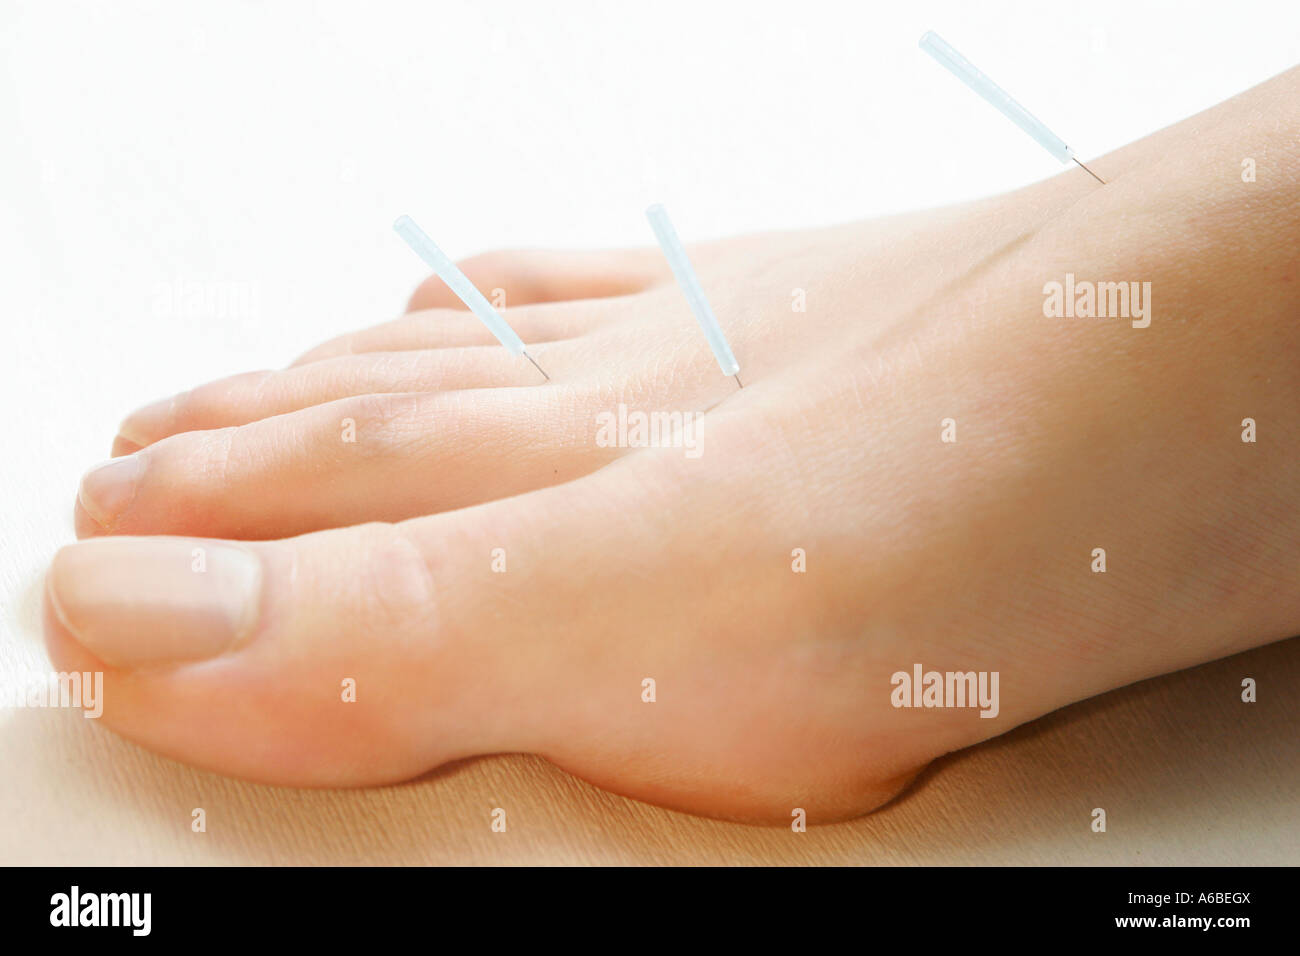 Women receiving acupuncture treatment Stock Photo